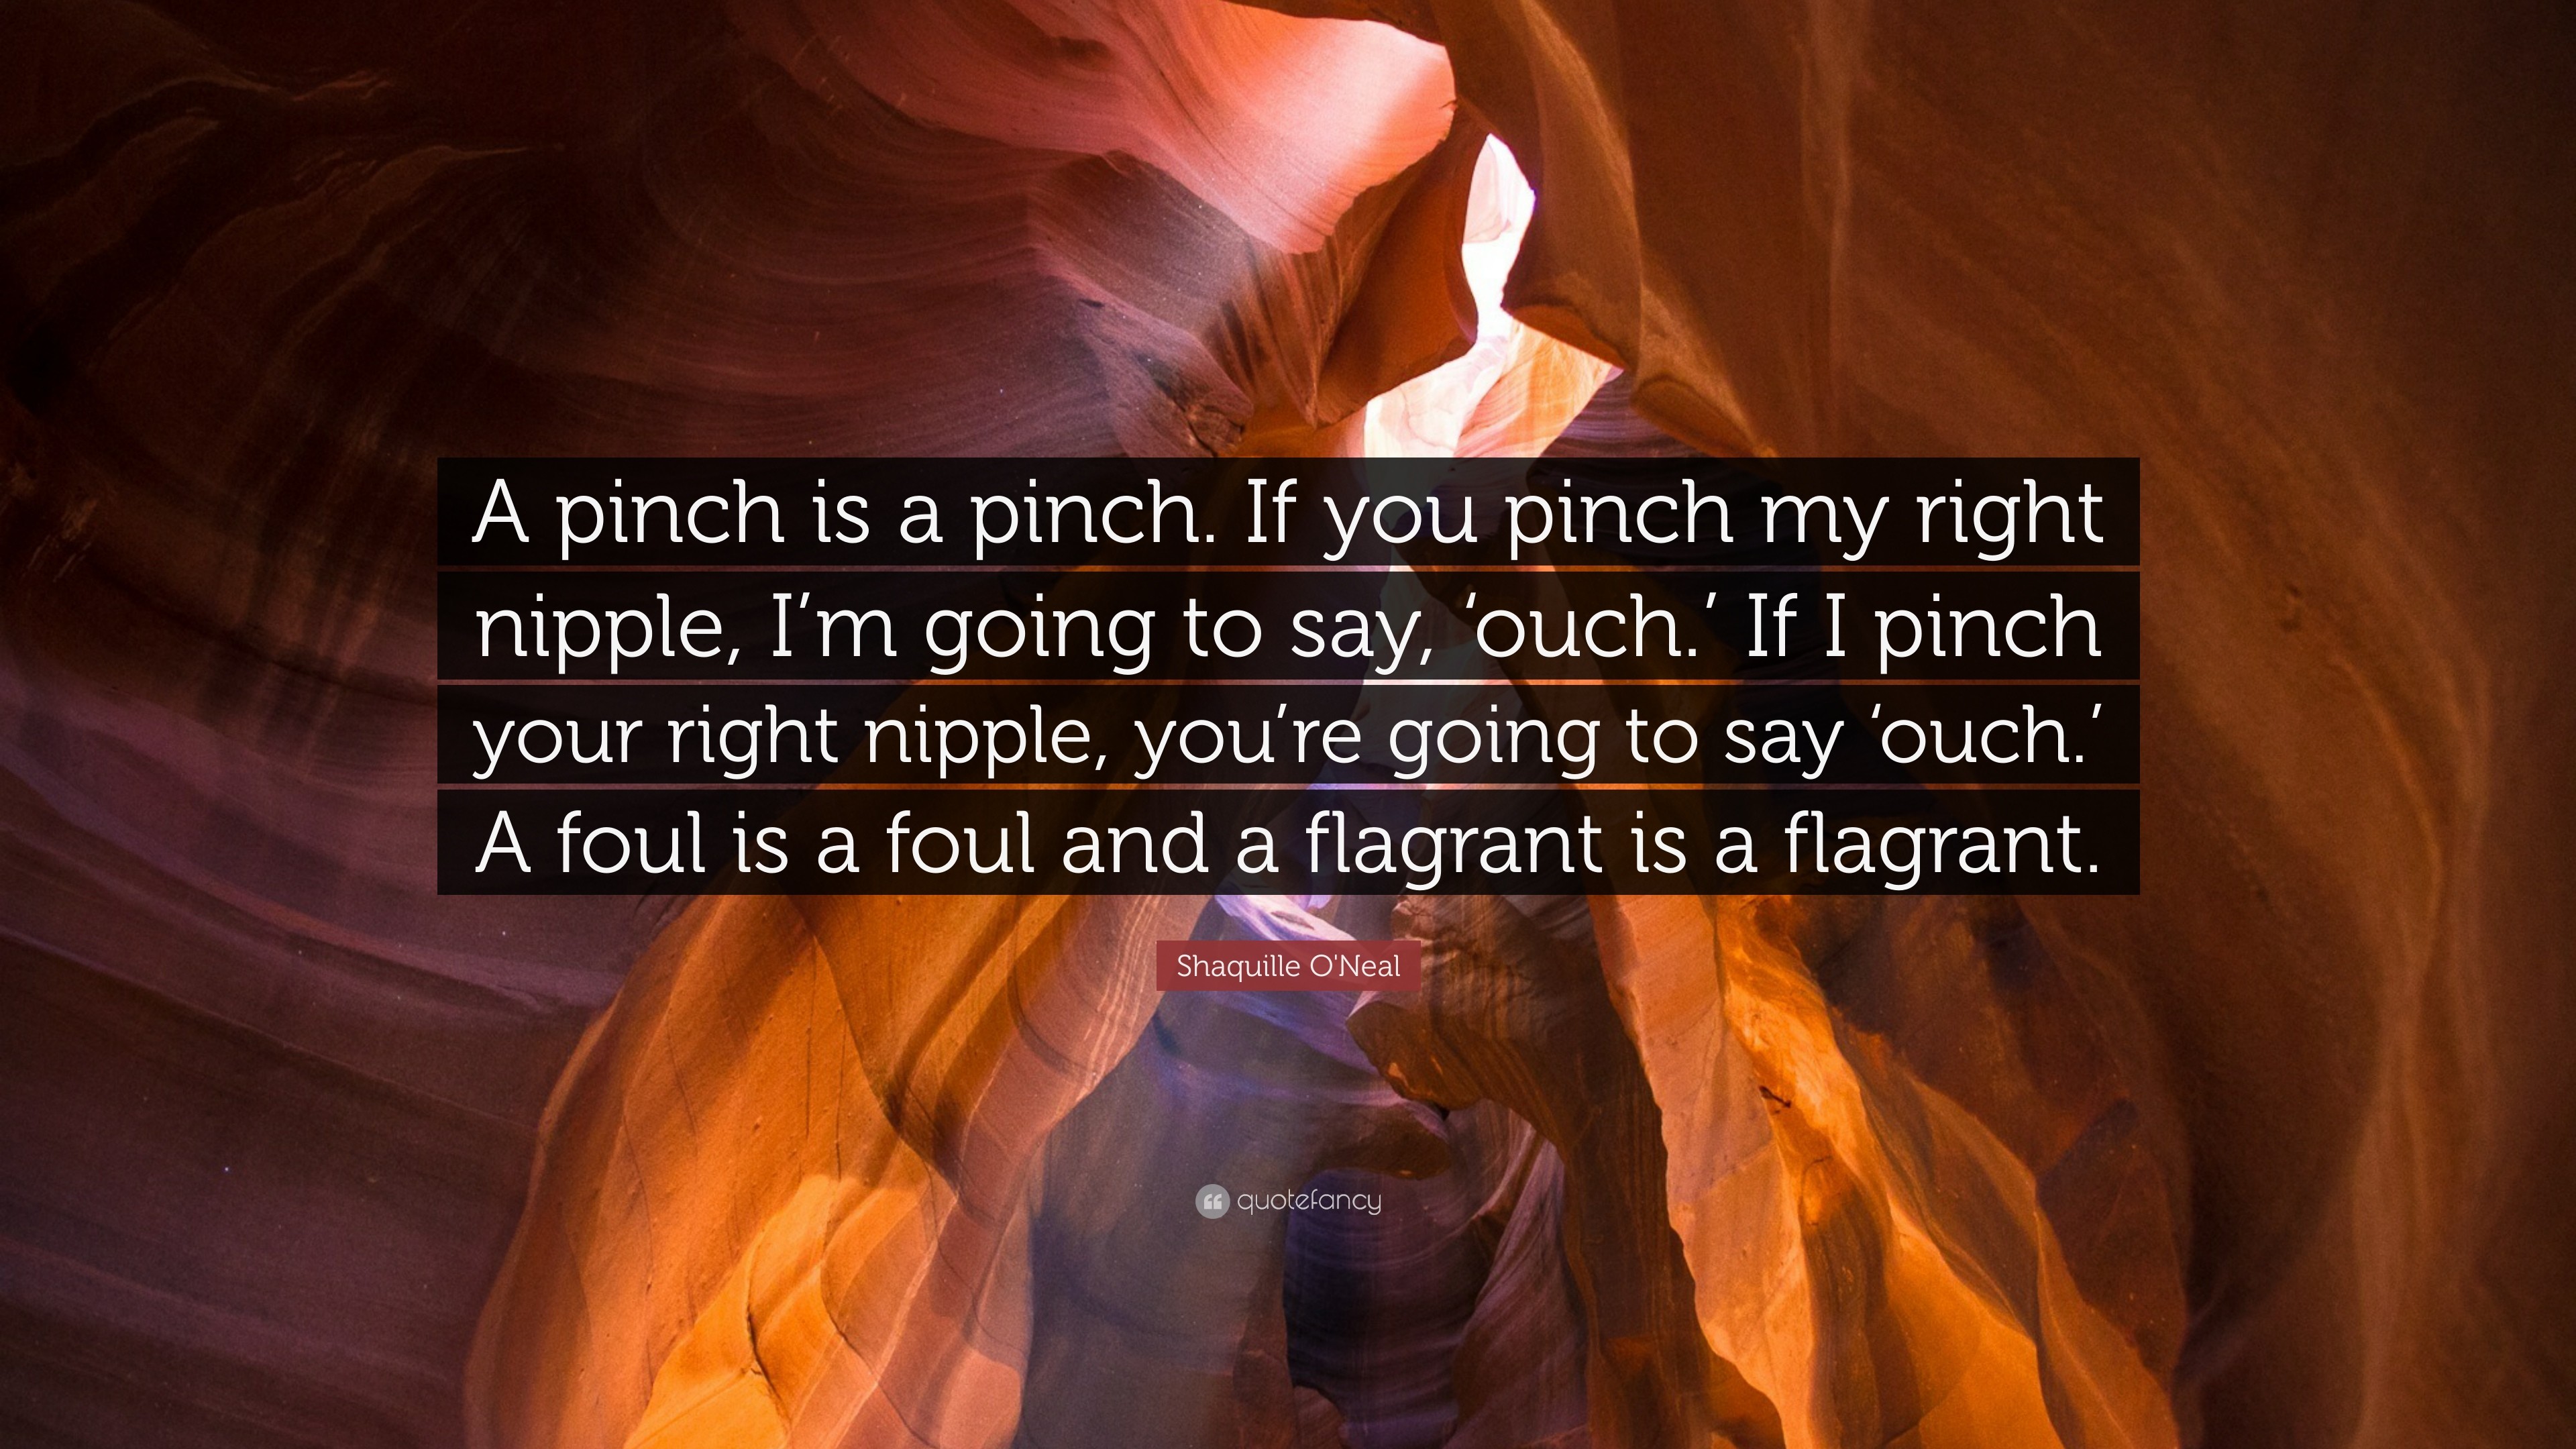 3840x2160 Shaquille O'Neal Quote: “A pinch is a pinch. If you pinch